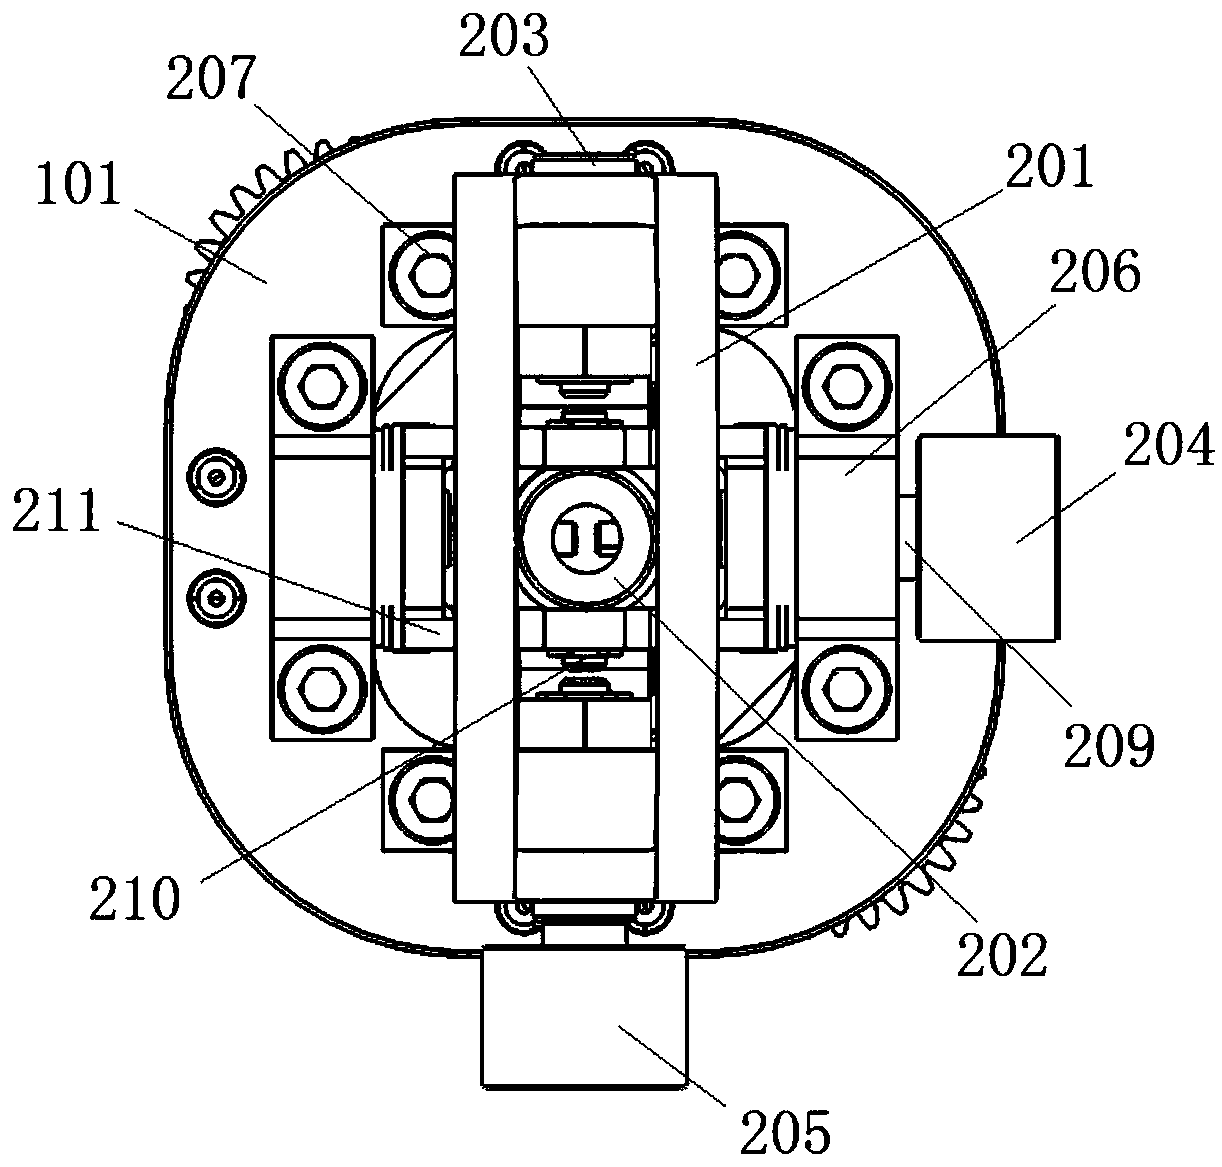 Two-degree-of-freedom variable-rigidity ball-and-socket joint of robot